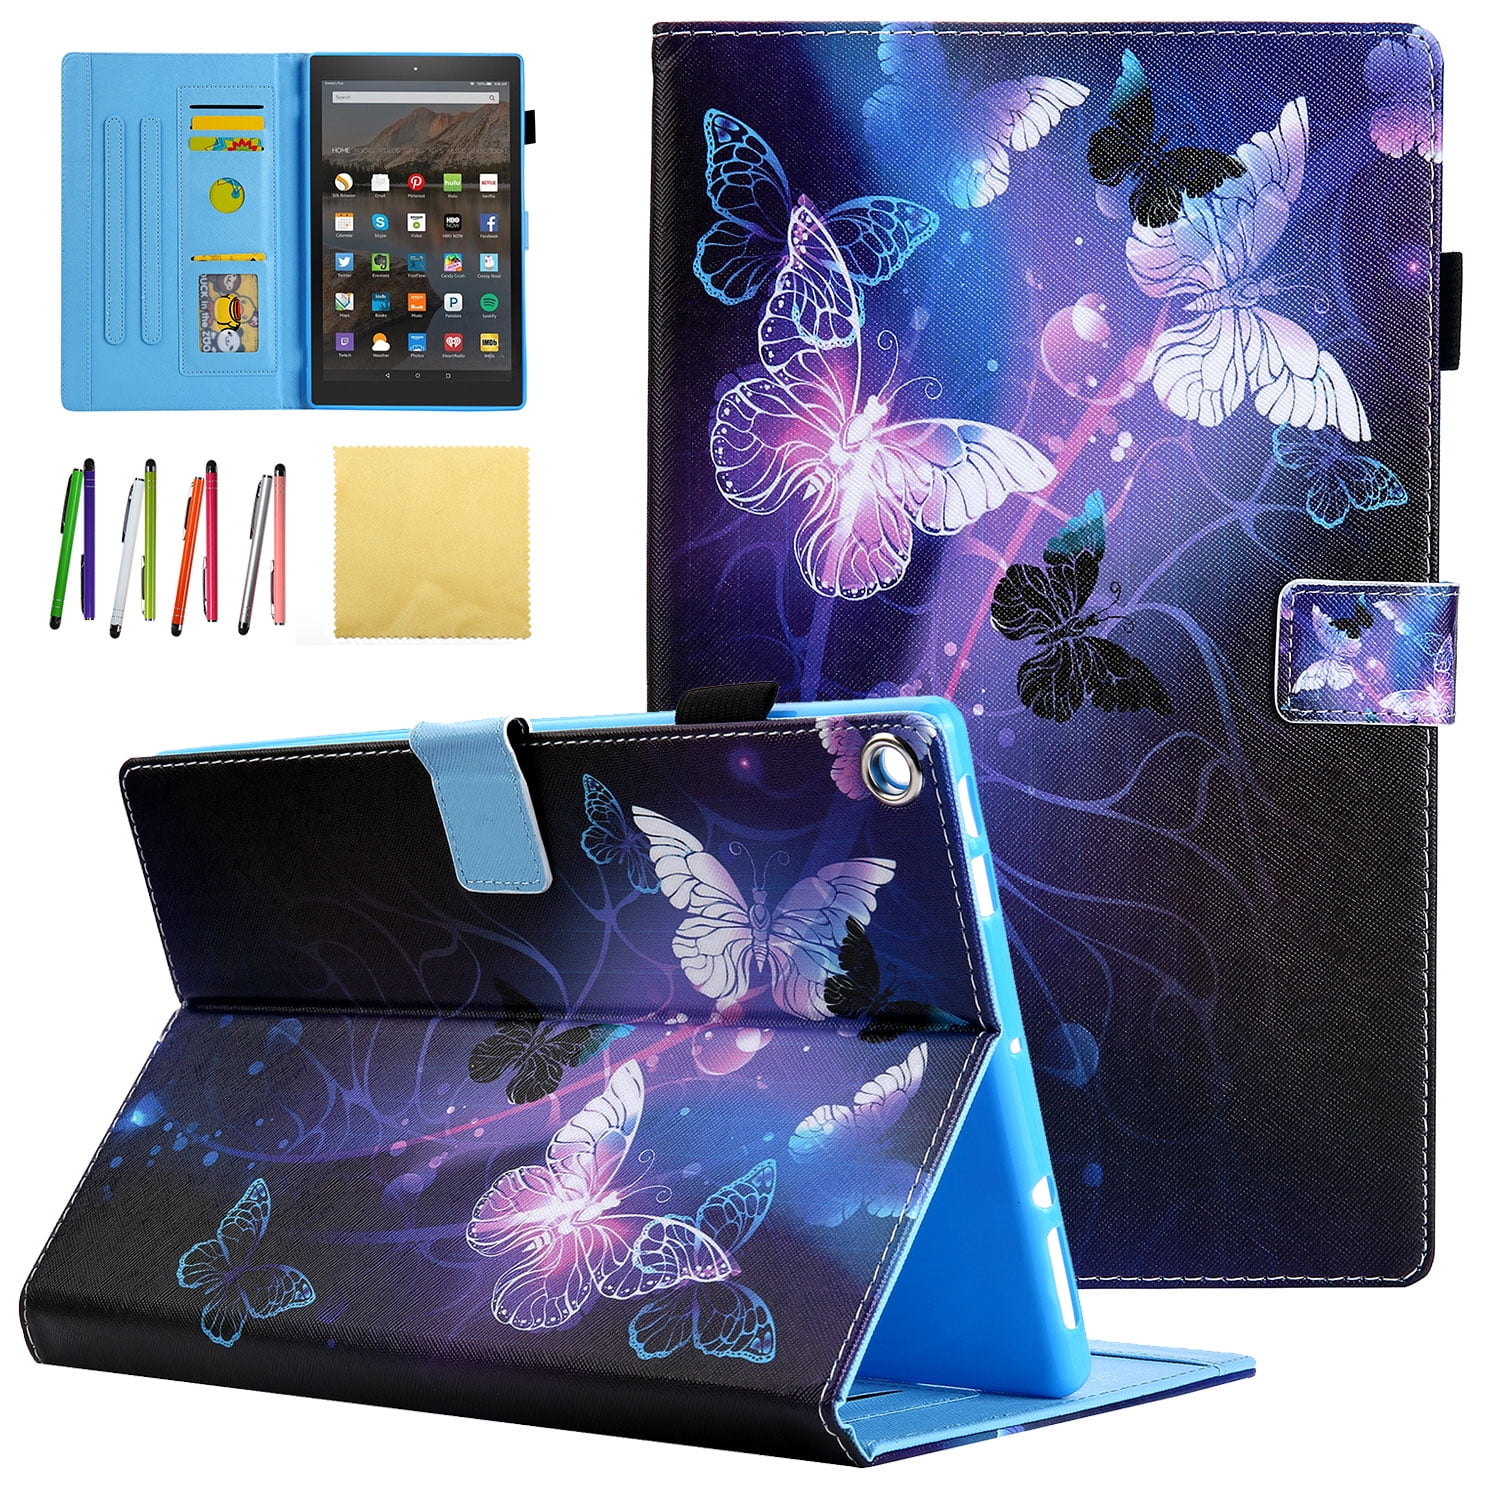 amazon fire hd 8 8th generation tablet covers